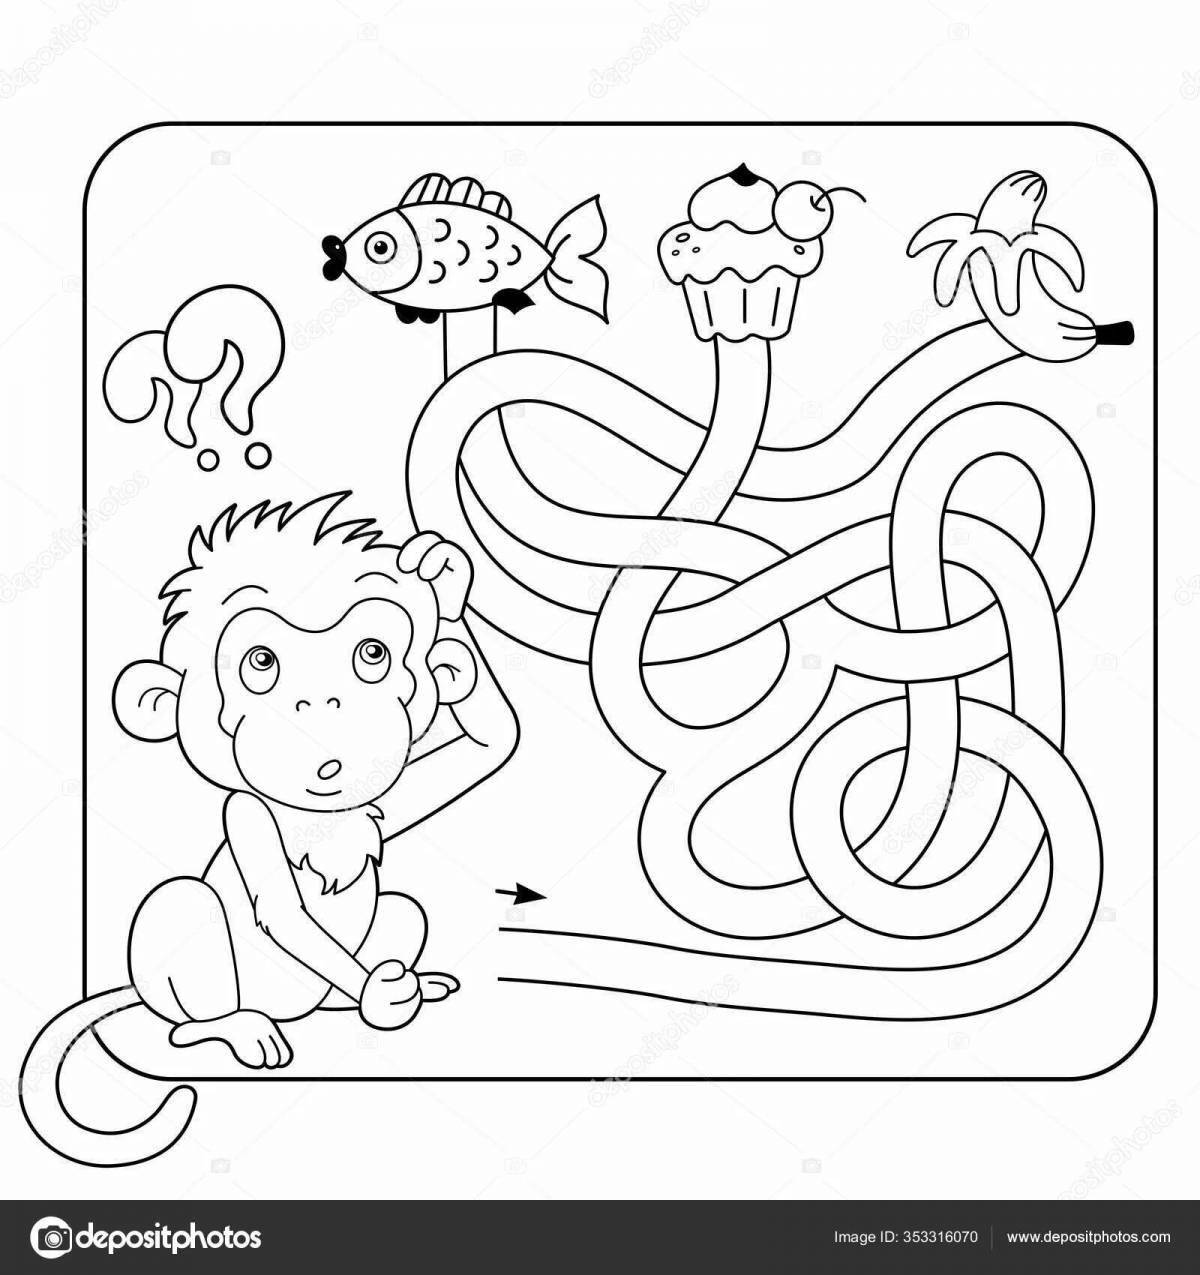 Live coloring games for boys 3-4 years old